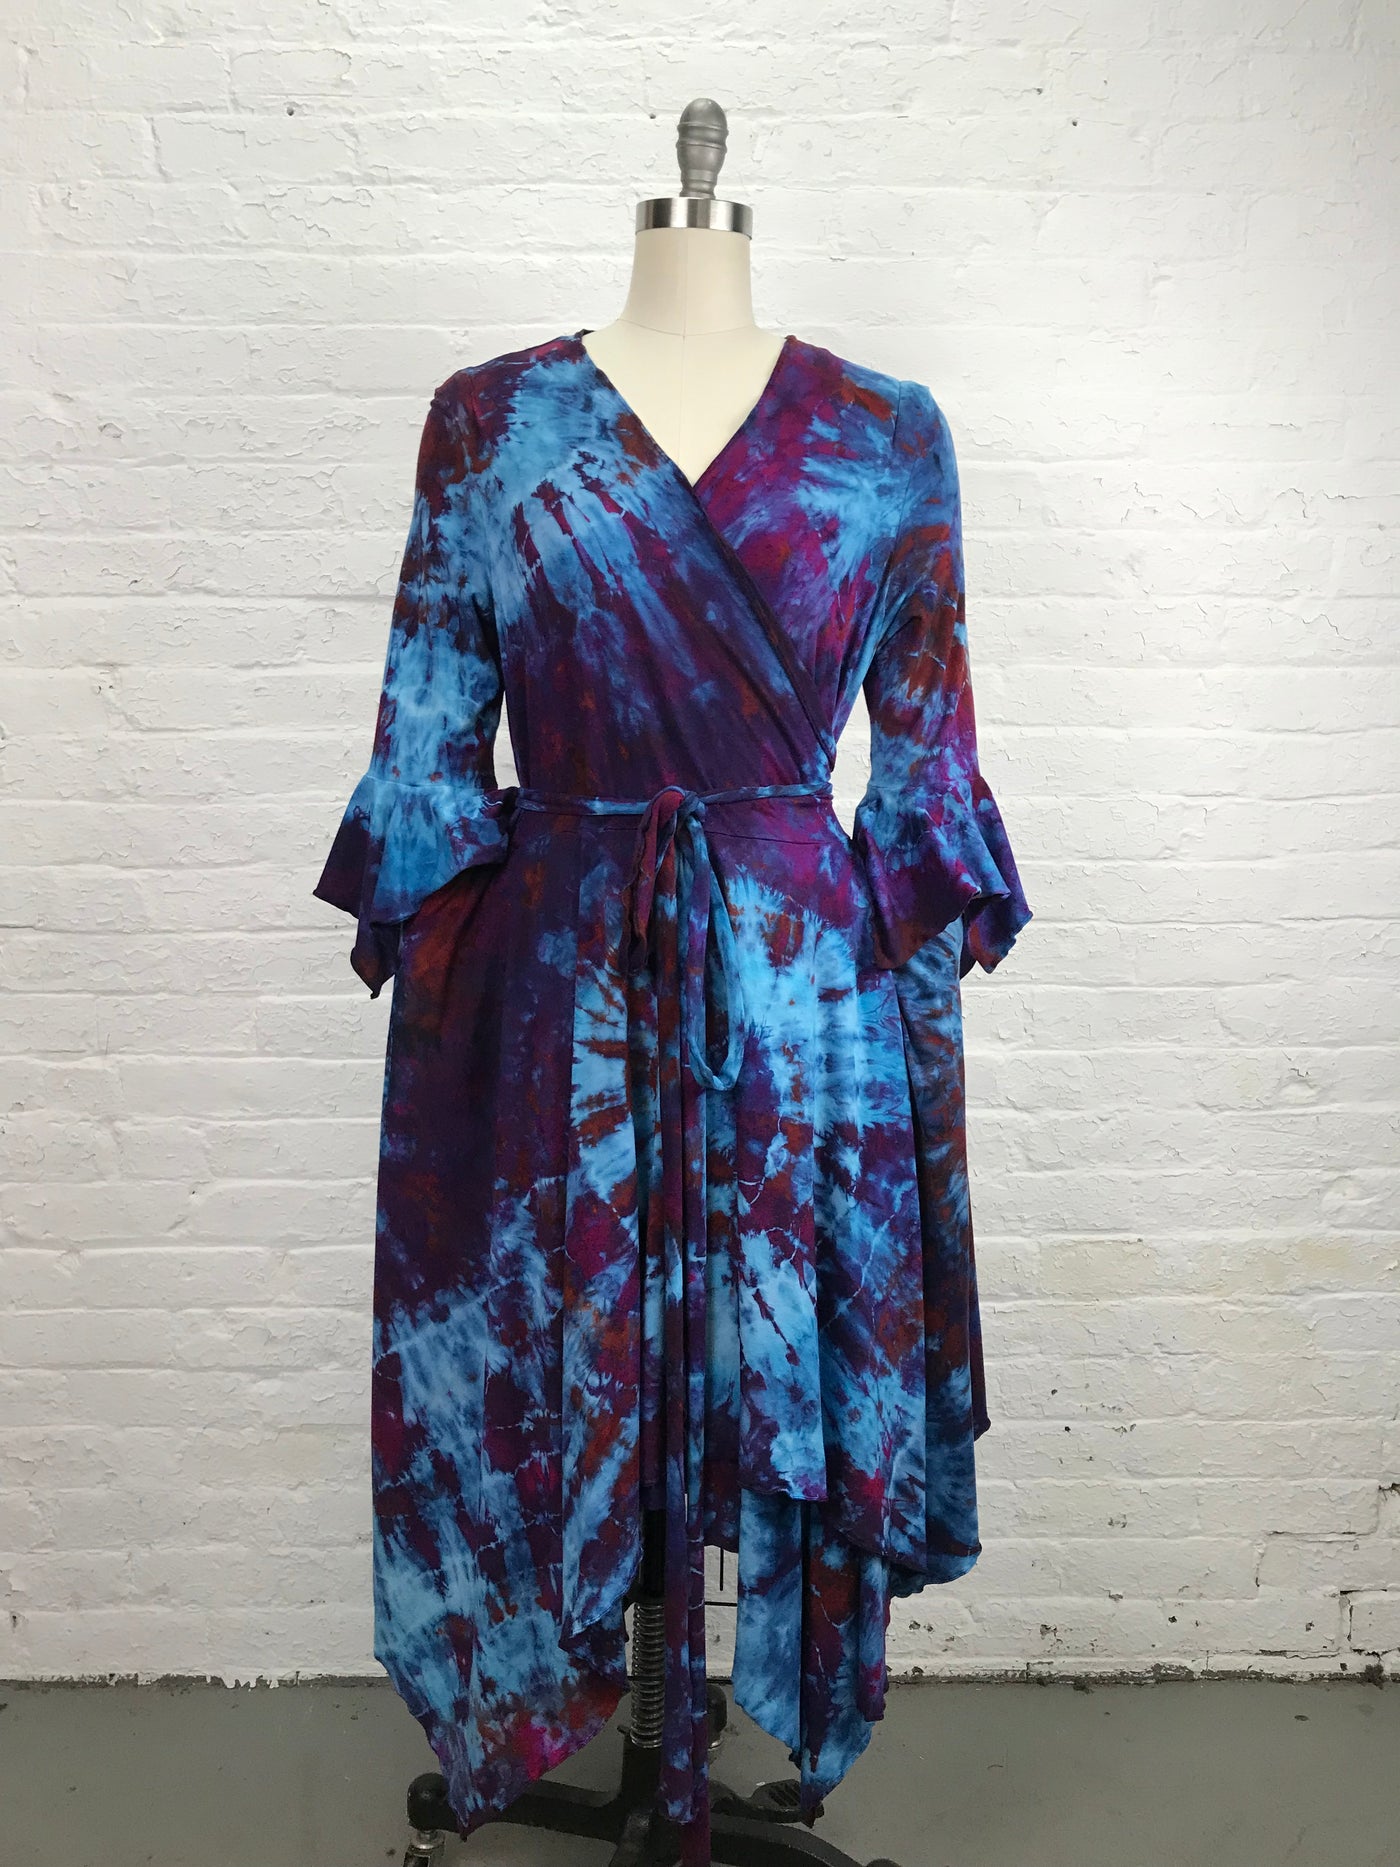 The Flamenco Wrap Dress in Falling Berries is a mix of blues and violets has an asymmetrical hemline and fitted elbow length sleeves that end in a delightful flounce. Wrap styling lends itself to an easy fit and a flattering V-neckline and pockets - front view